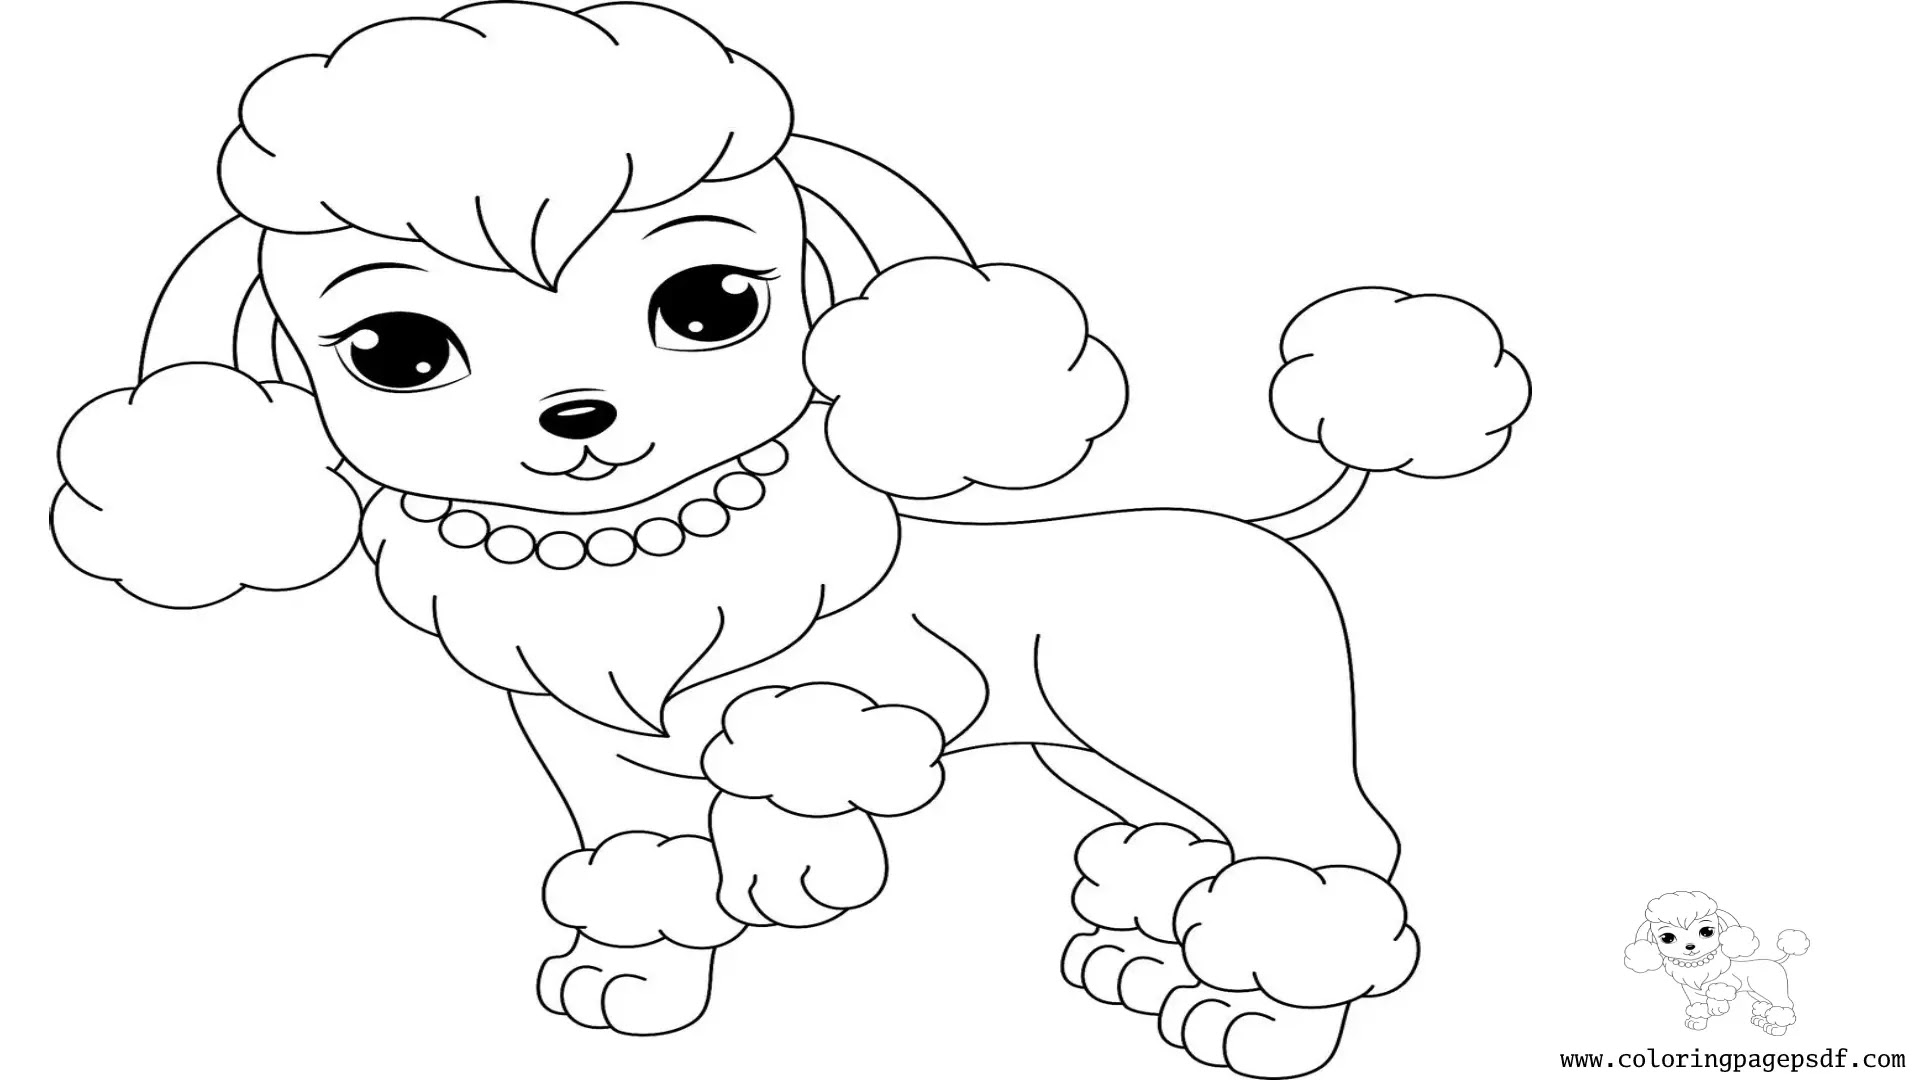 Coloring Pages Of A Pretty Puppy Walking